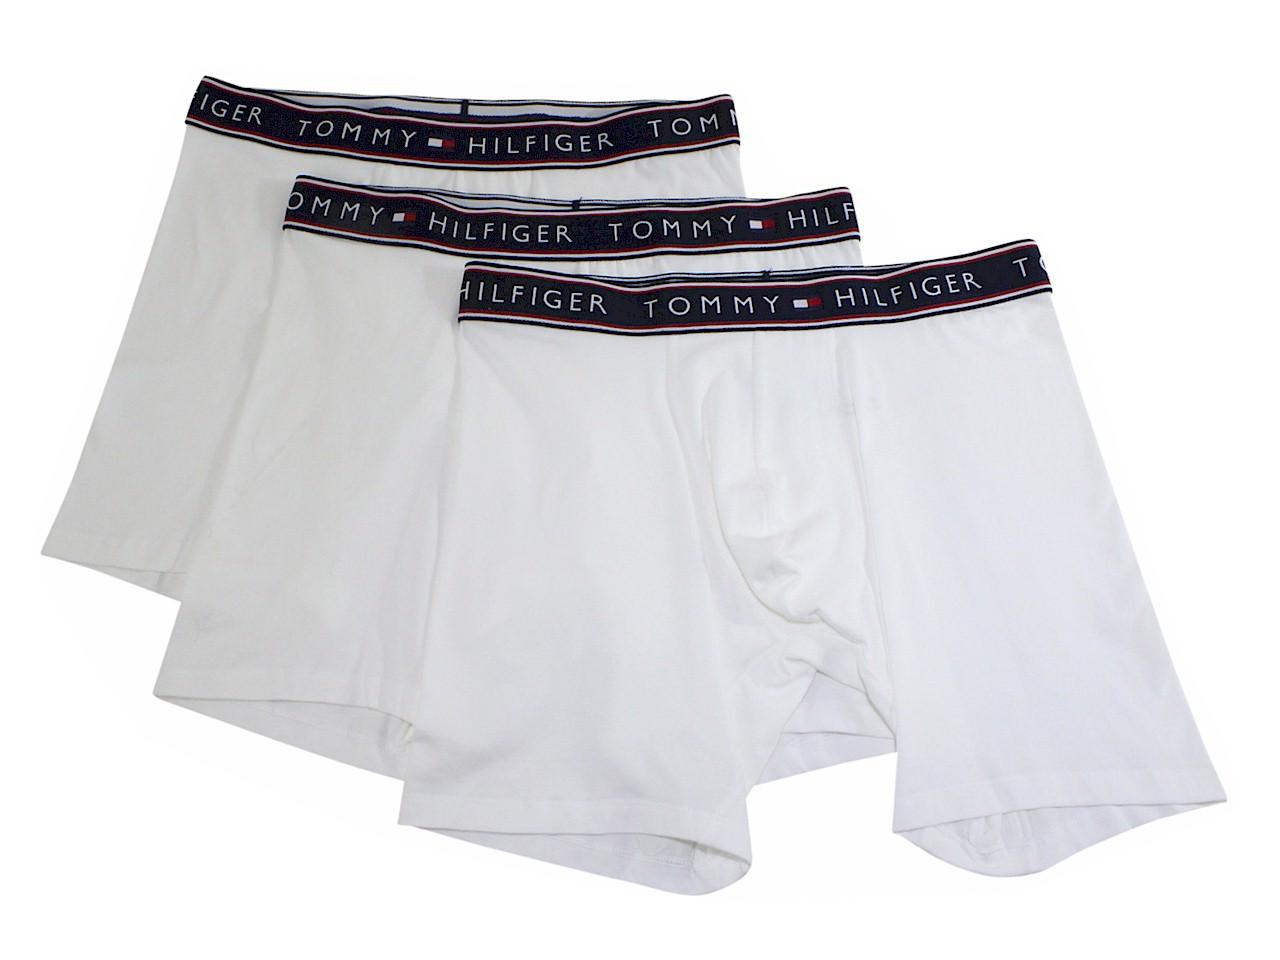 UPC 088541539319 product image for Tommy Hilfiger Men's 3 Pairs Stretch White Boxer Briefs Underwear Sz: S - Small | upcitemdb.com